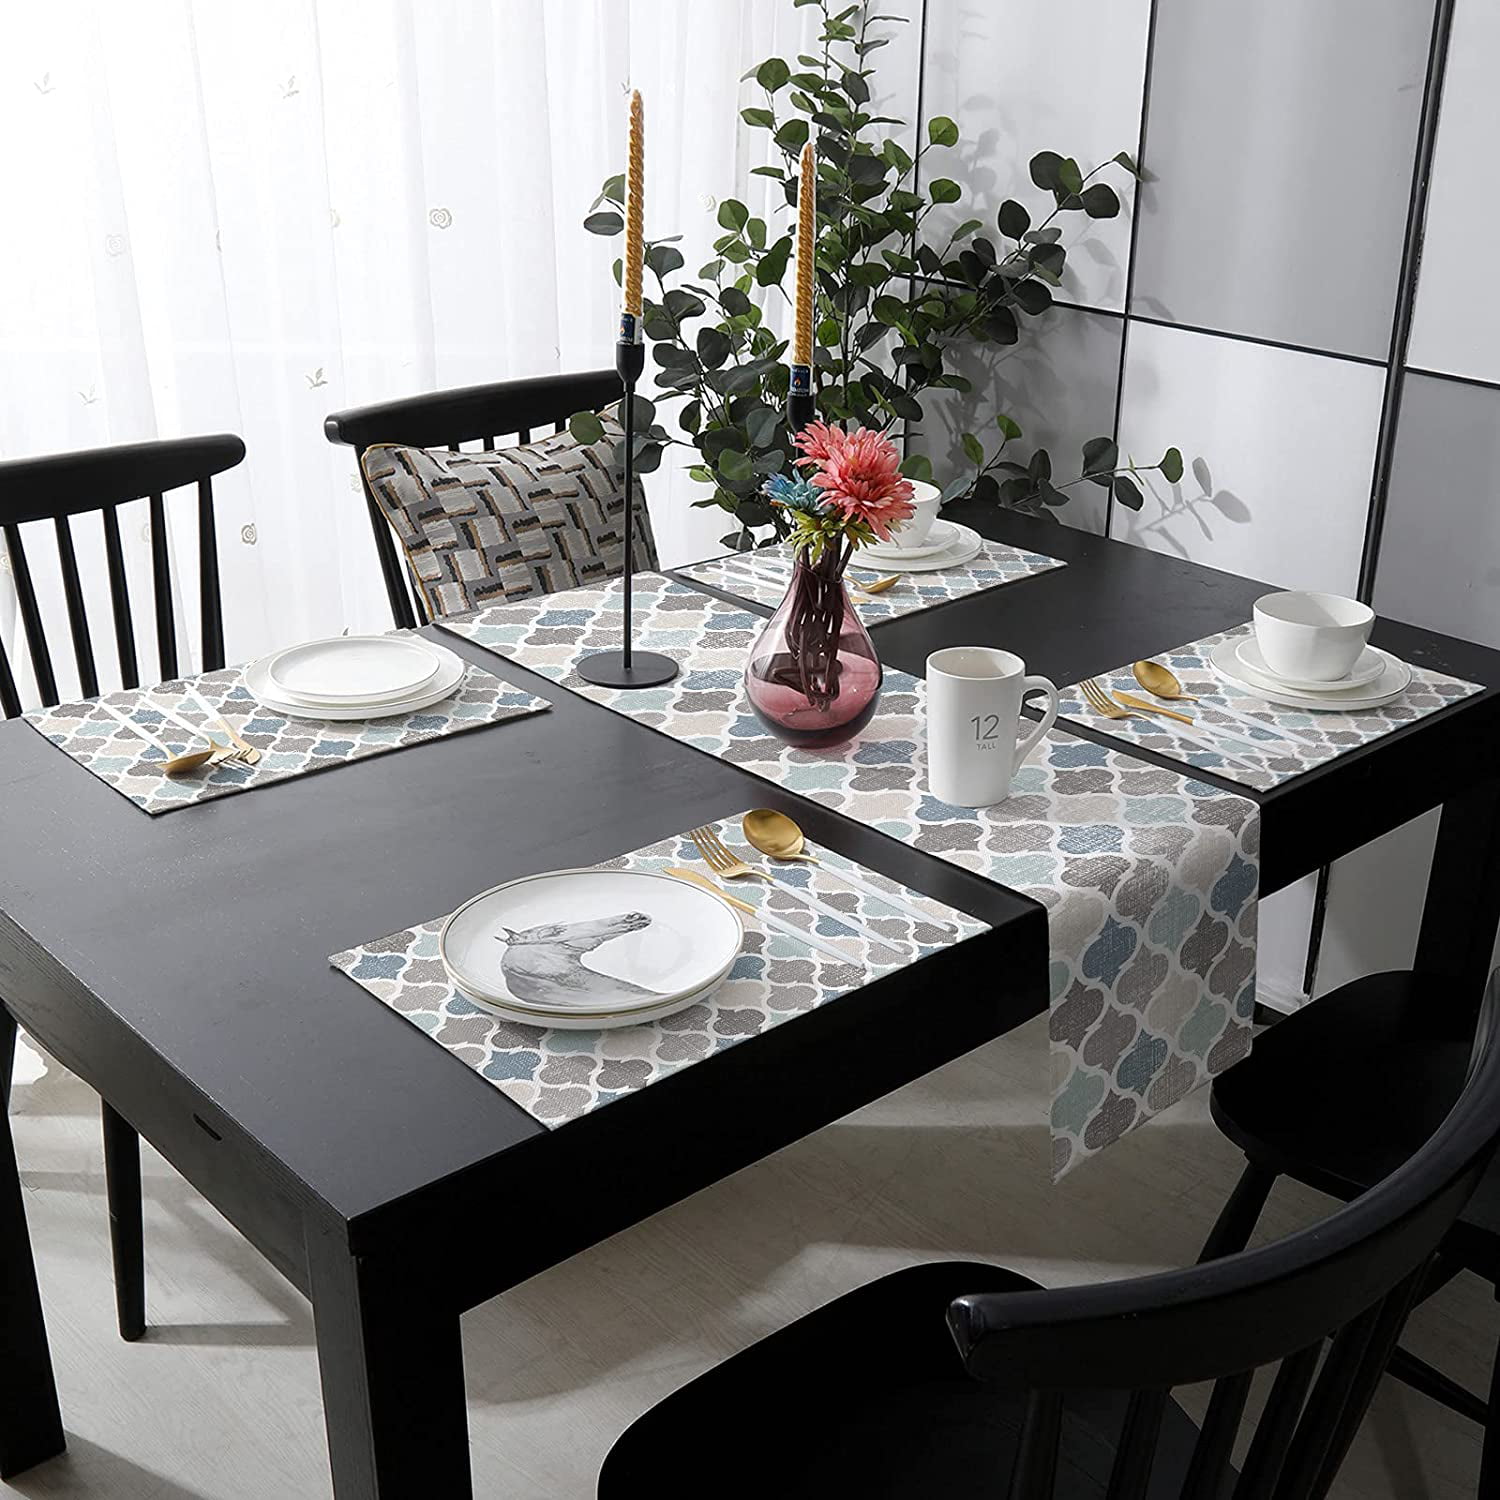 Details about  / Fabric Dinning Table Mats 6 Table Mats with 1 Table Runner  Easy to Wash